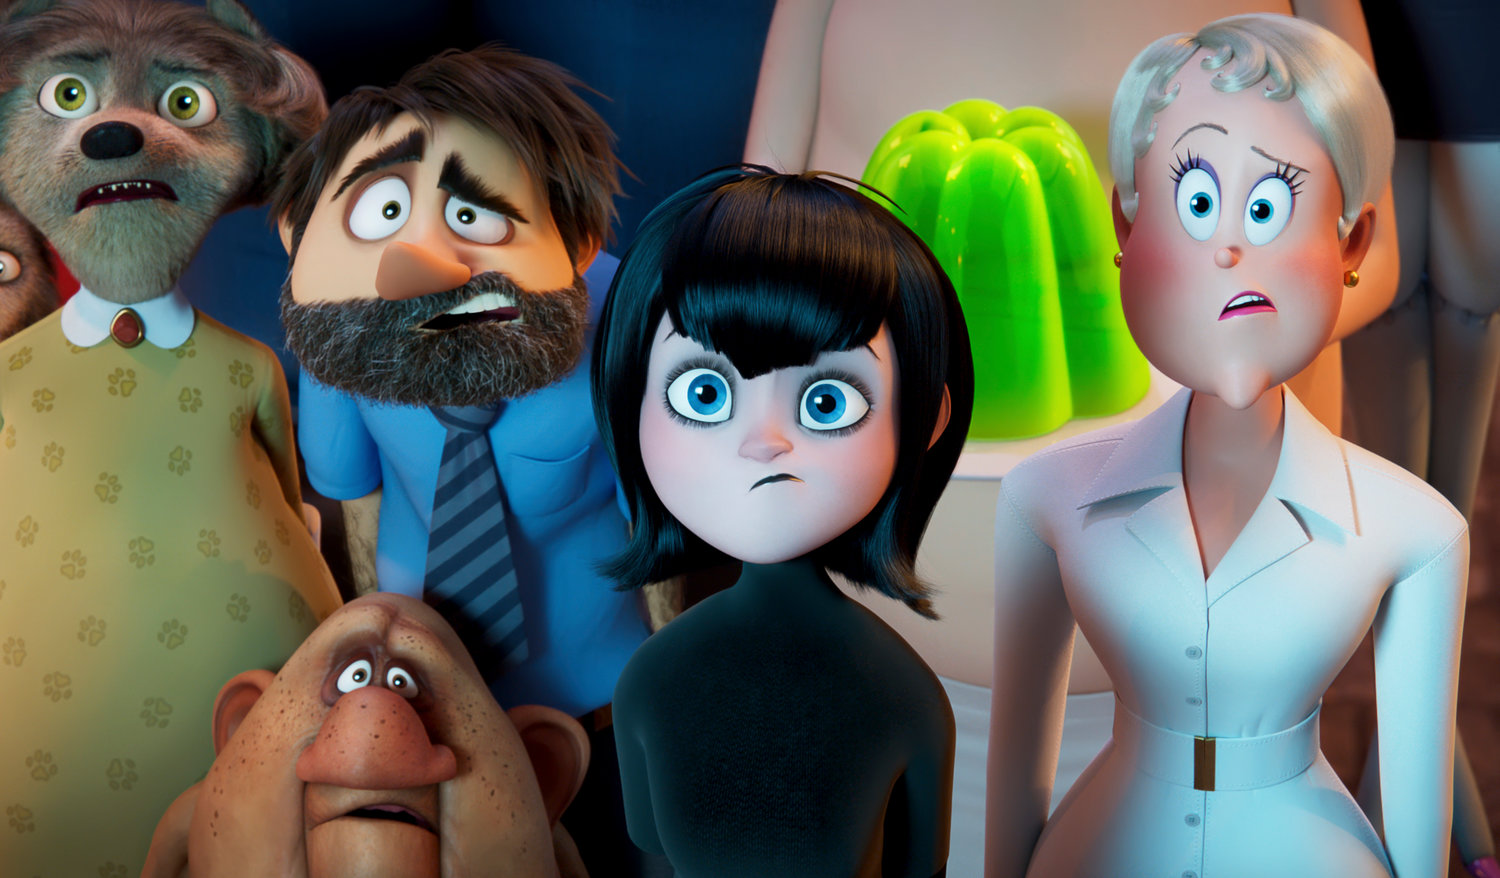 MONSTER MASH — Mavis, voiced by Selena Gomez, center, and Ericka, voiced by Kathryn Hahn, right, in the animated film “Hotel Transylvania: Transformania.”